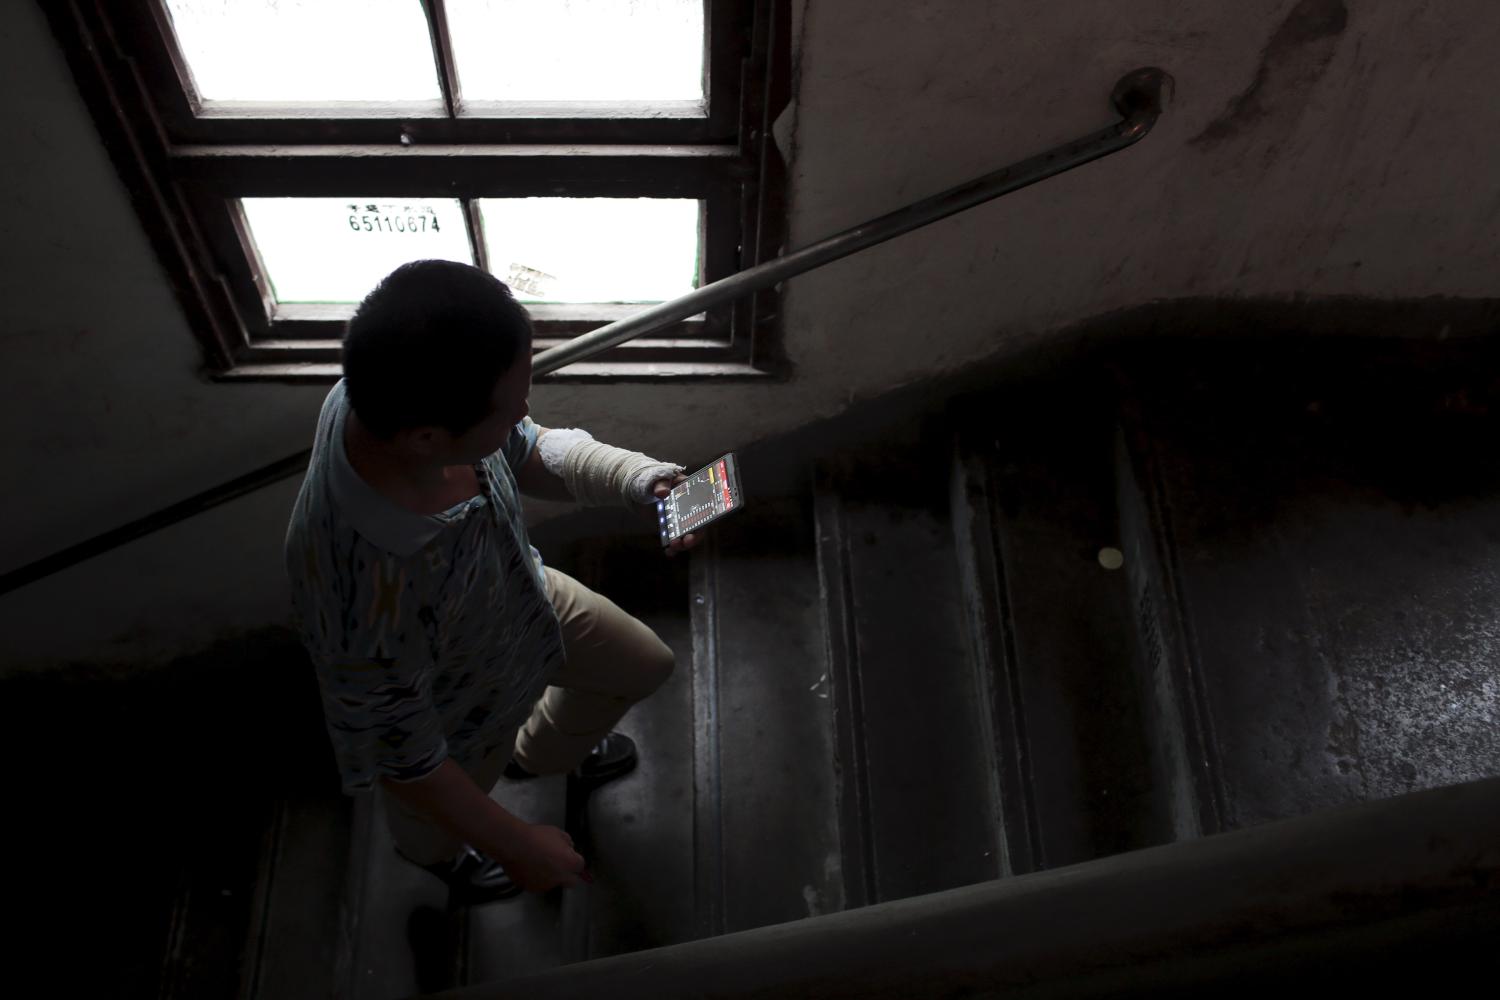 Gao Haibao, looks at stock information on his mobile phone as he climbs the stairs to his apartment.